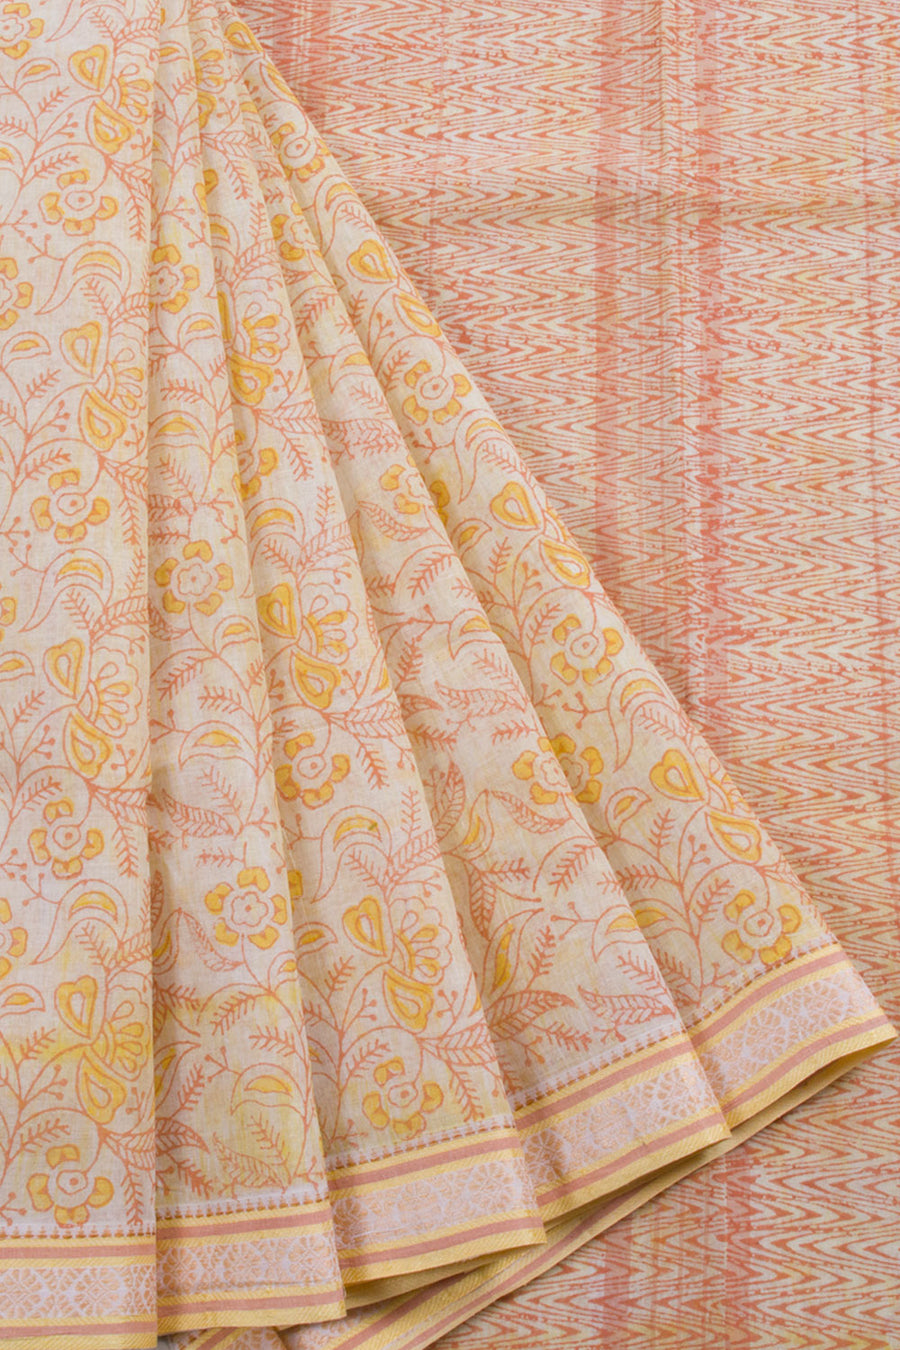 Hand Block Printed Cotton Saree with Floral Motifs and Without Blouse